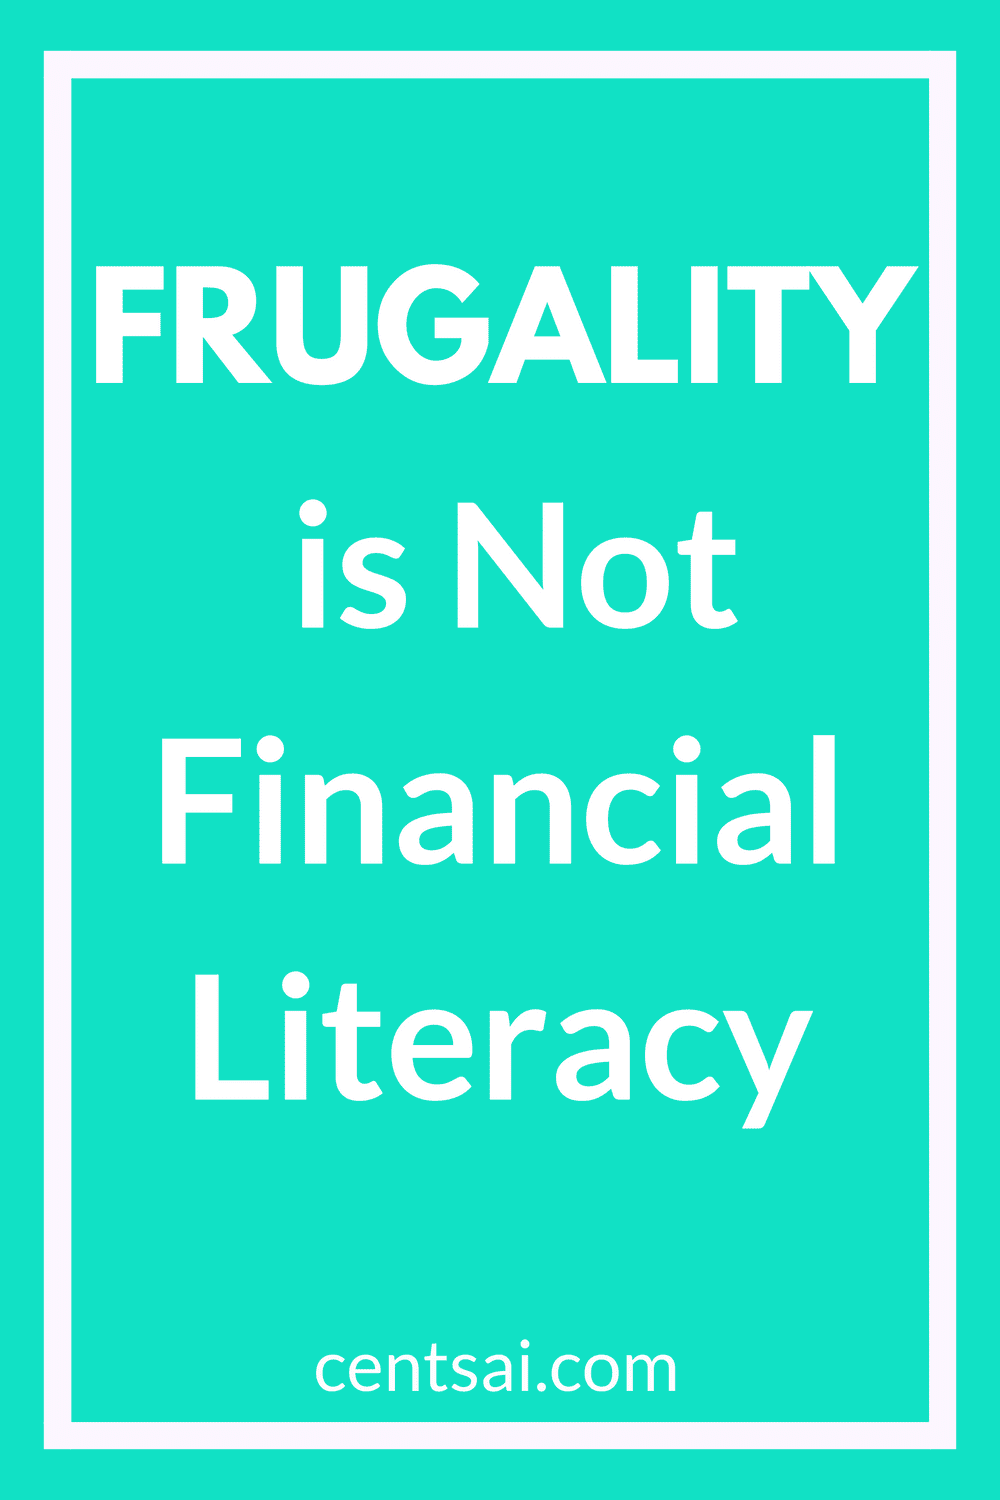 Frugality is Not Financial Literacy. Yes, it's right! Many people seem to think that financial literacy means learning to lead a frugal lifestyle. But this is far from the truth. #frugality #frugal #financialliteracy